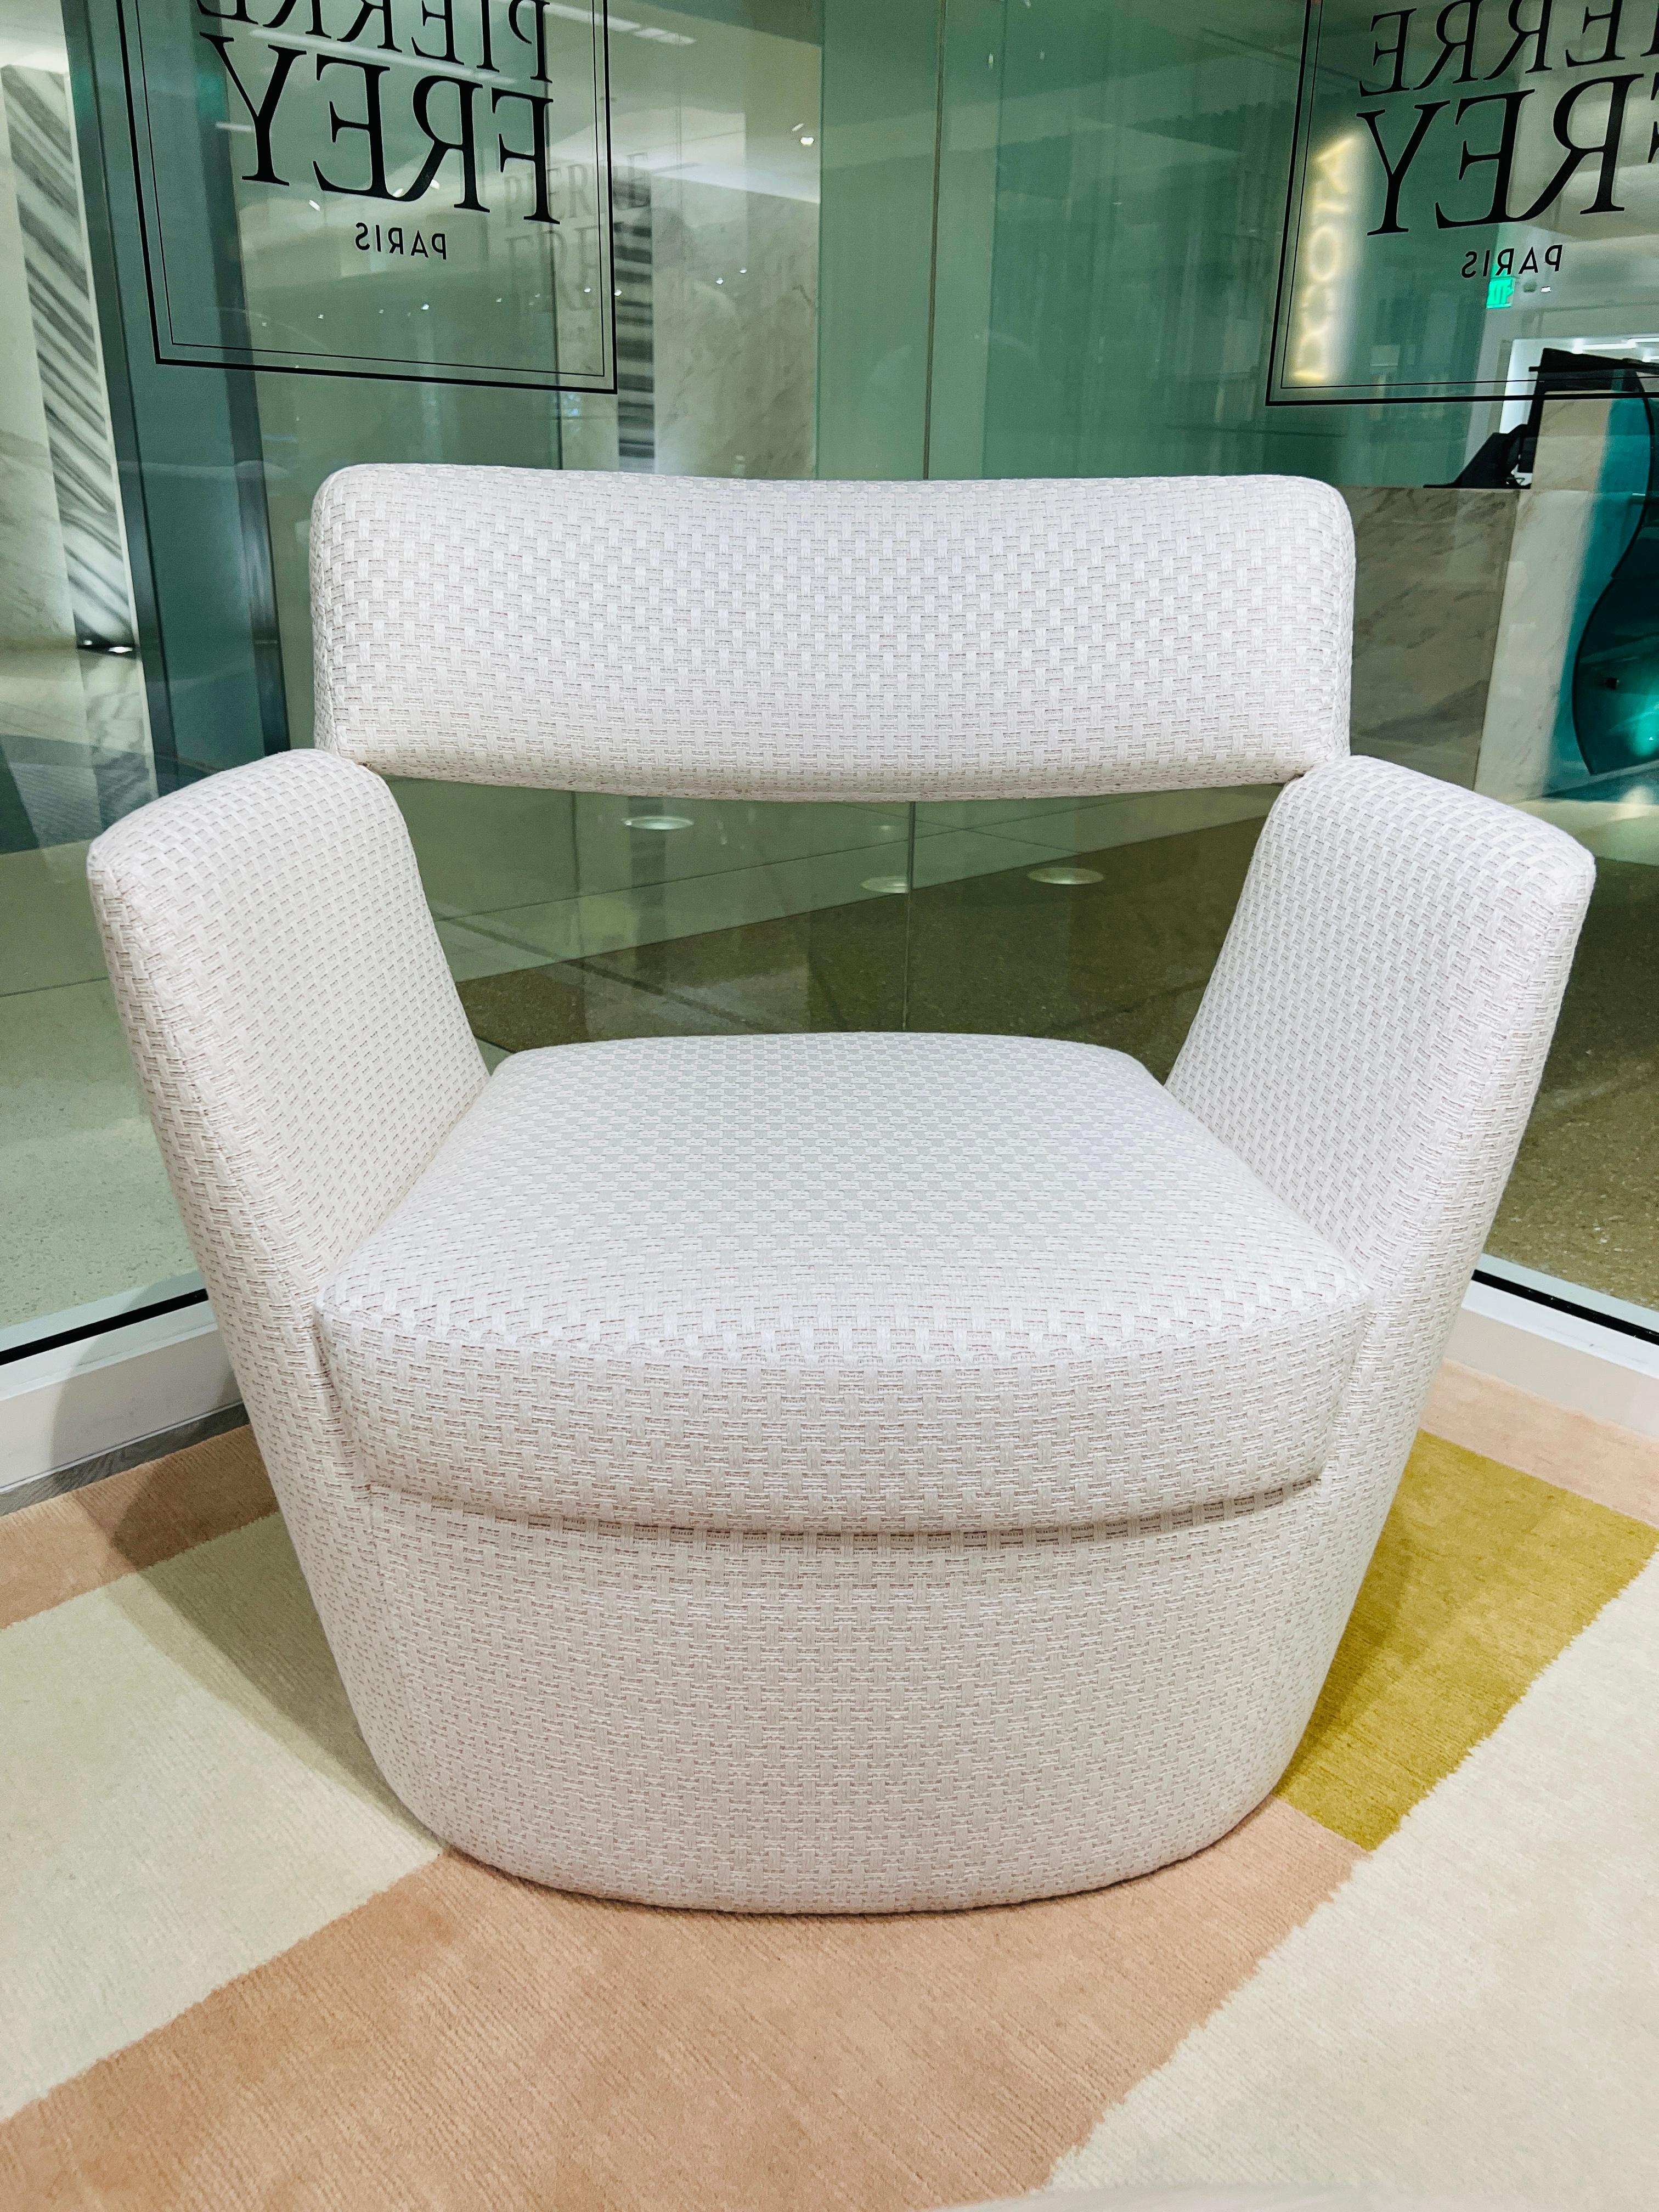 Contemporary armchair designed by Goncalo Compos for Pierre Frey. The modernist chair features a suspended backrest with graphic angular lines against a round base. Completely upholstered in Pierre Frey's Sete Chaux, a performance linen fabric that